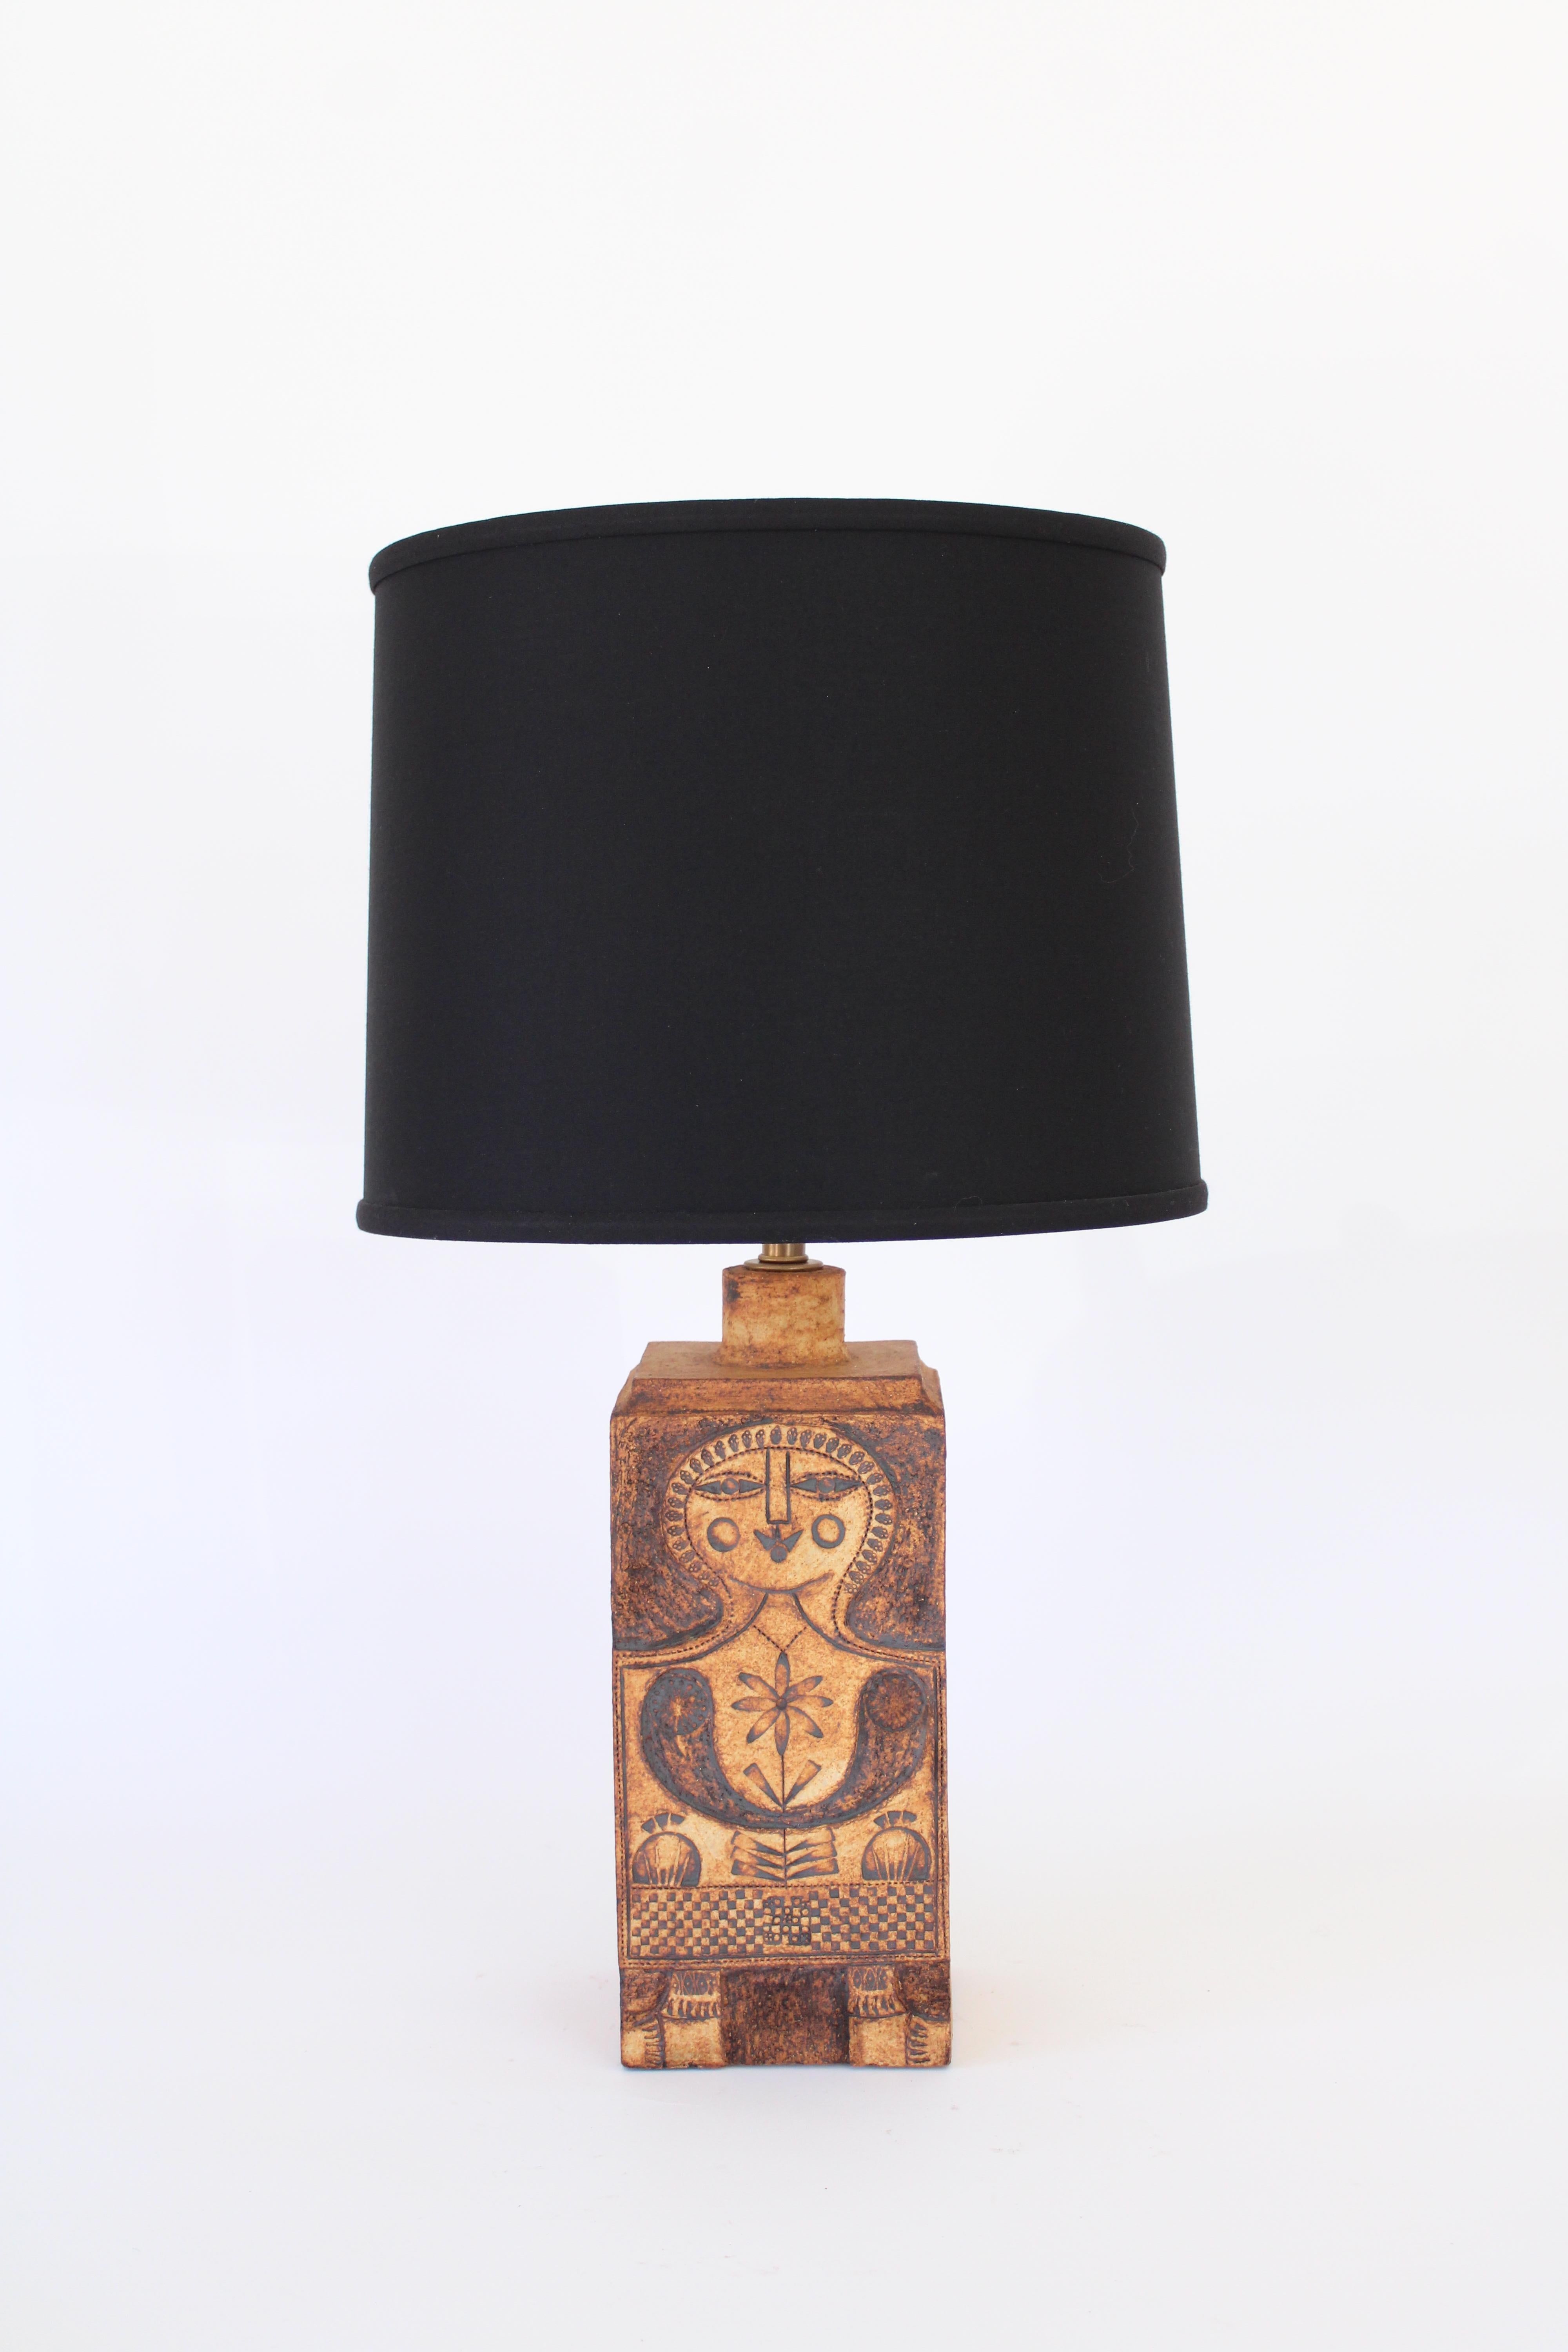 Roger Capron French Ceramic Table Lamp, Image of Woman circa 1977 In Good Condition For Sale In Chicago, IL